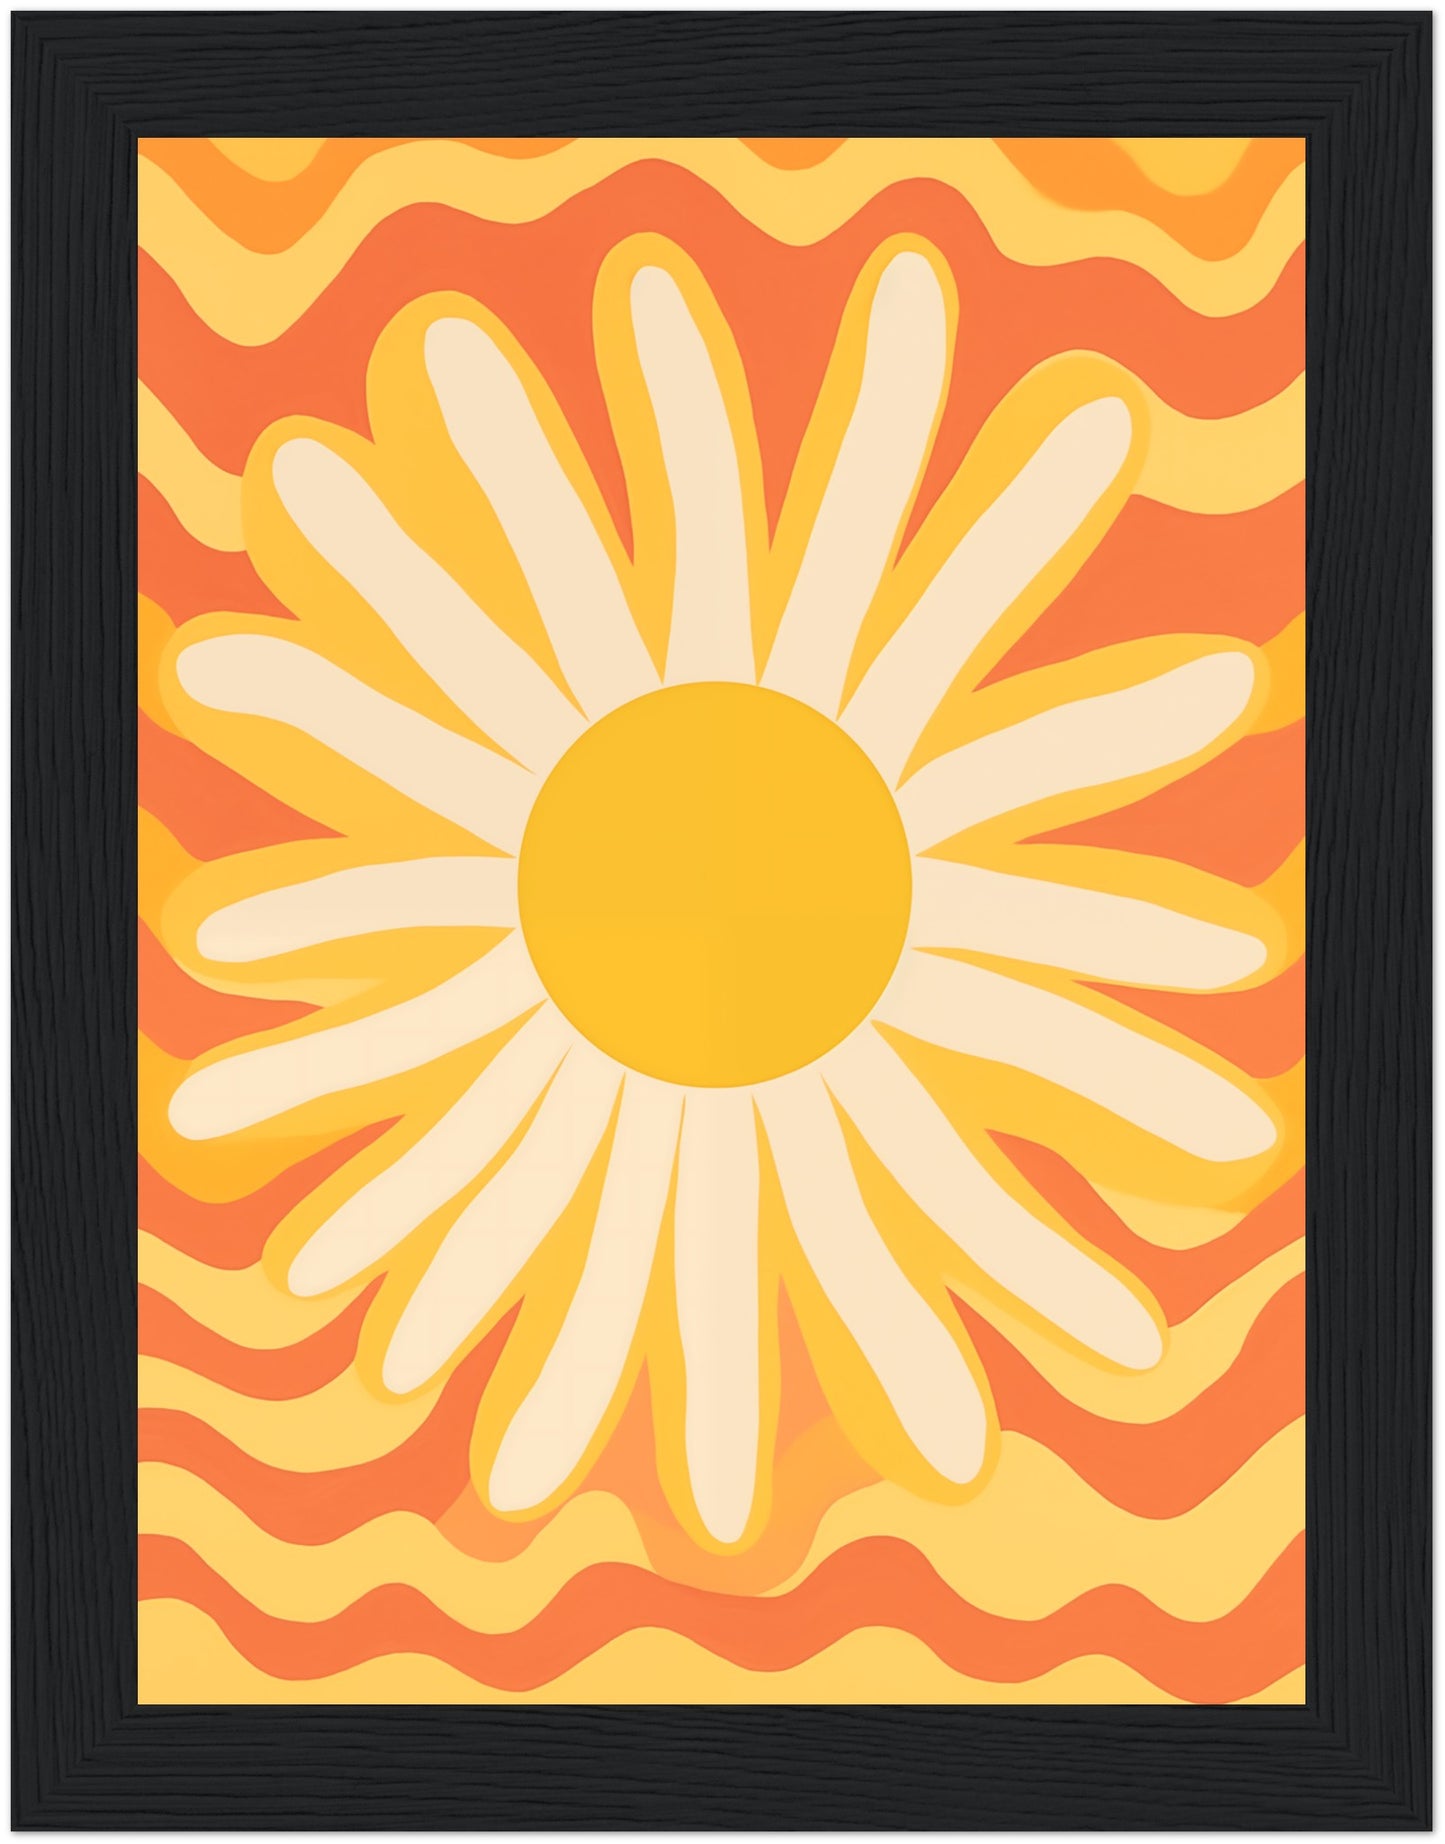 Abstract framed artwork of a sunflower against a wavy orange backdrop.